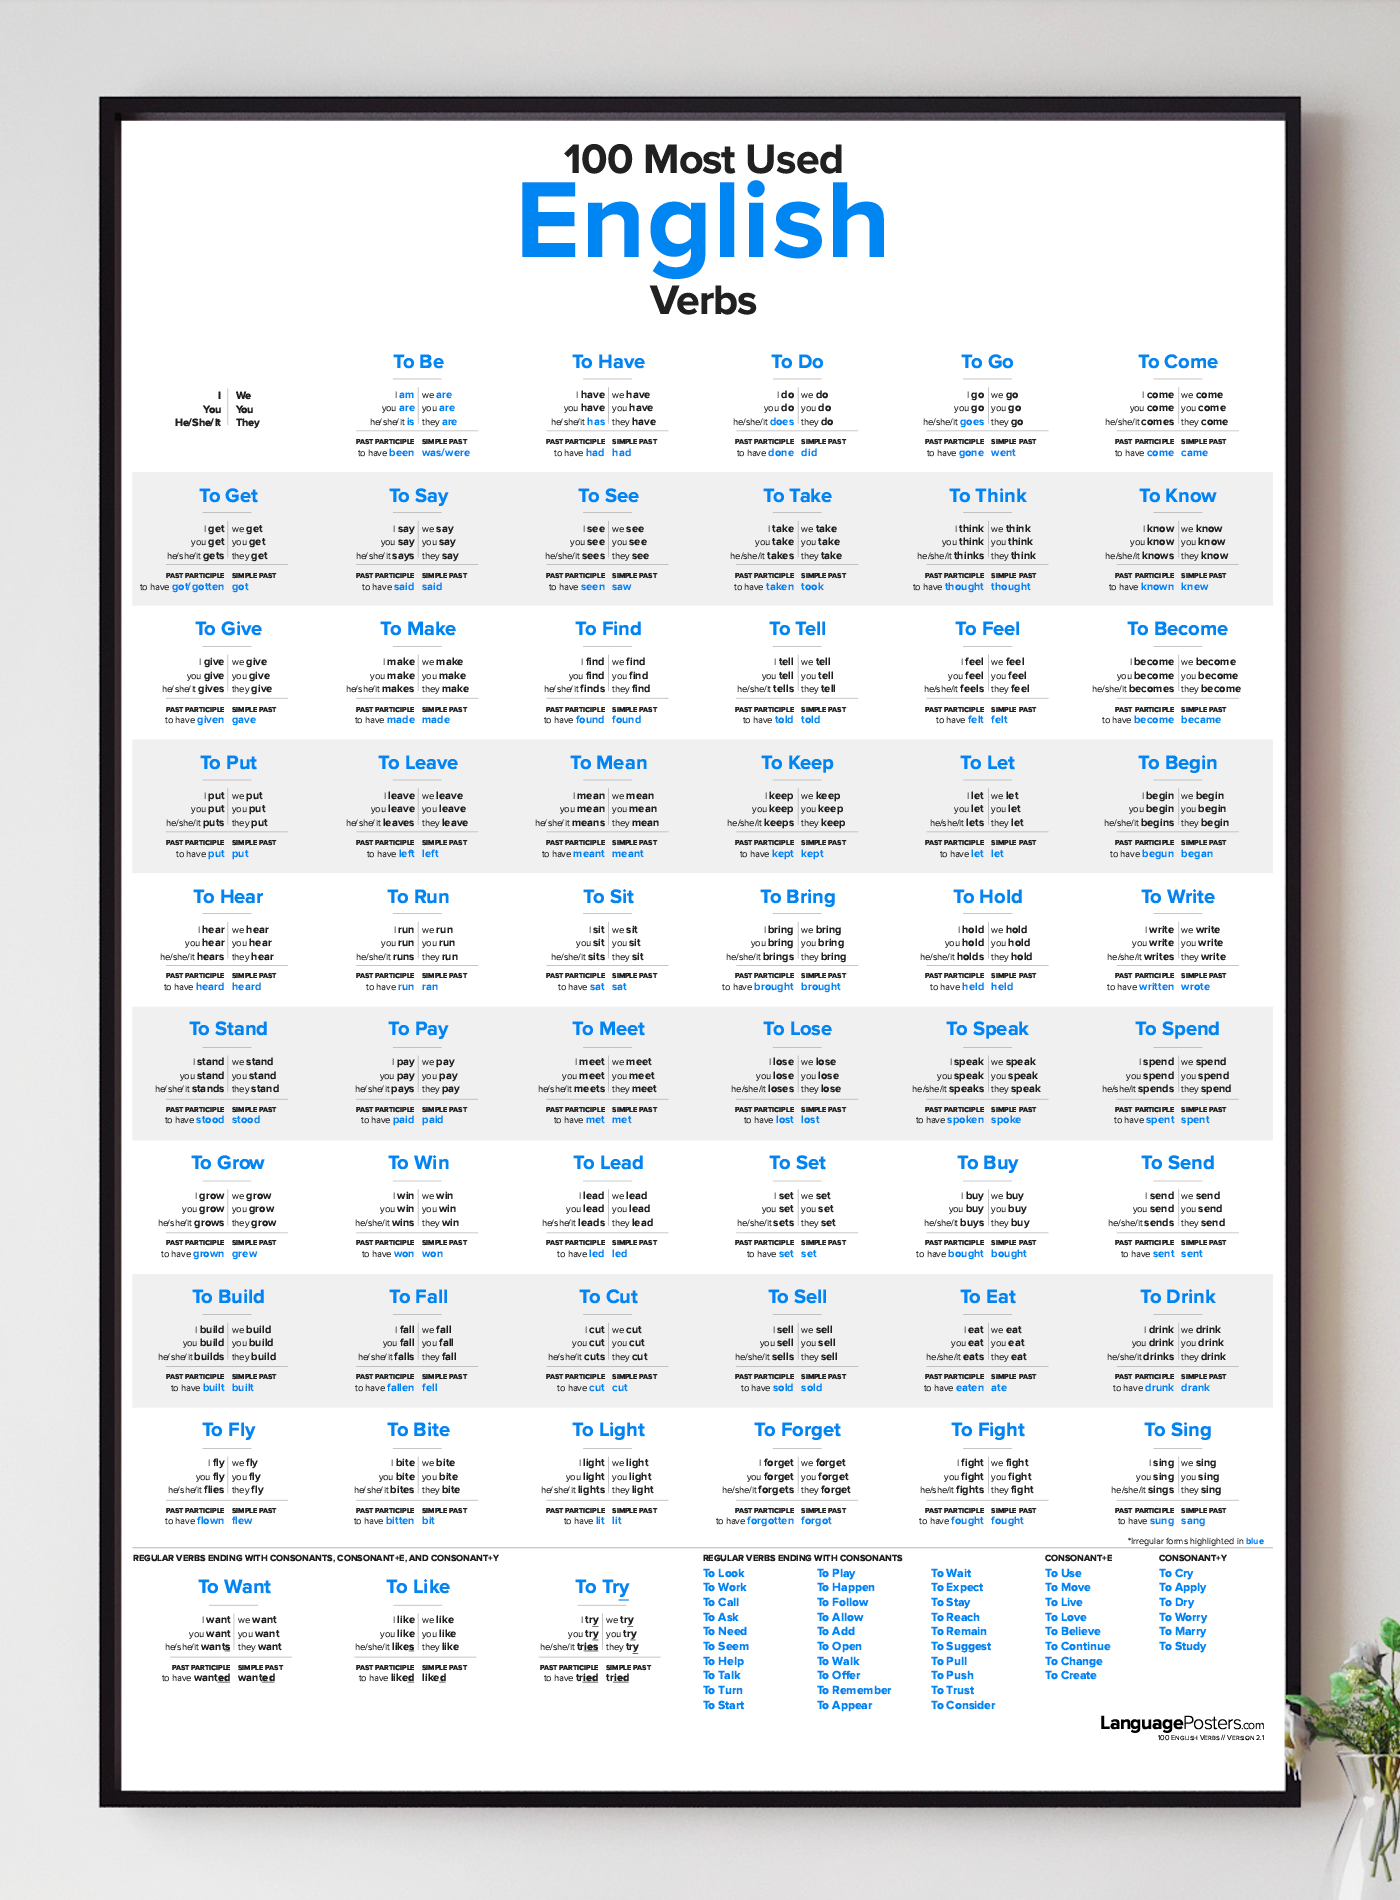 100 Most Used English Verbs Poster Languageposters Com